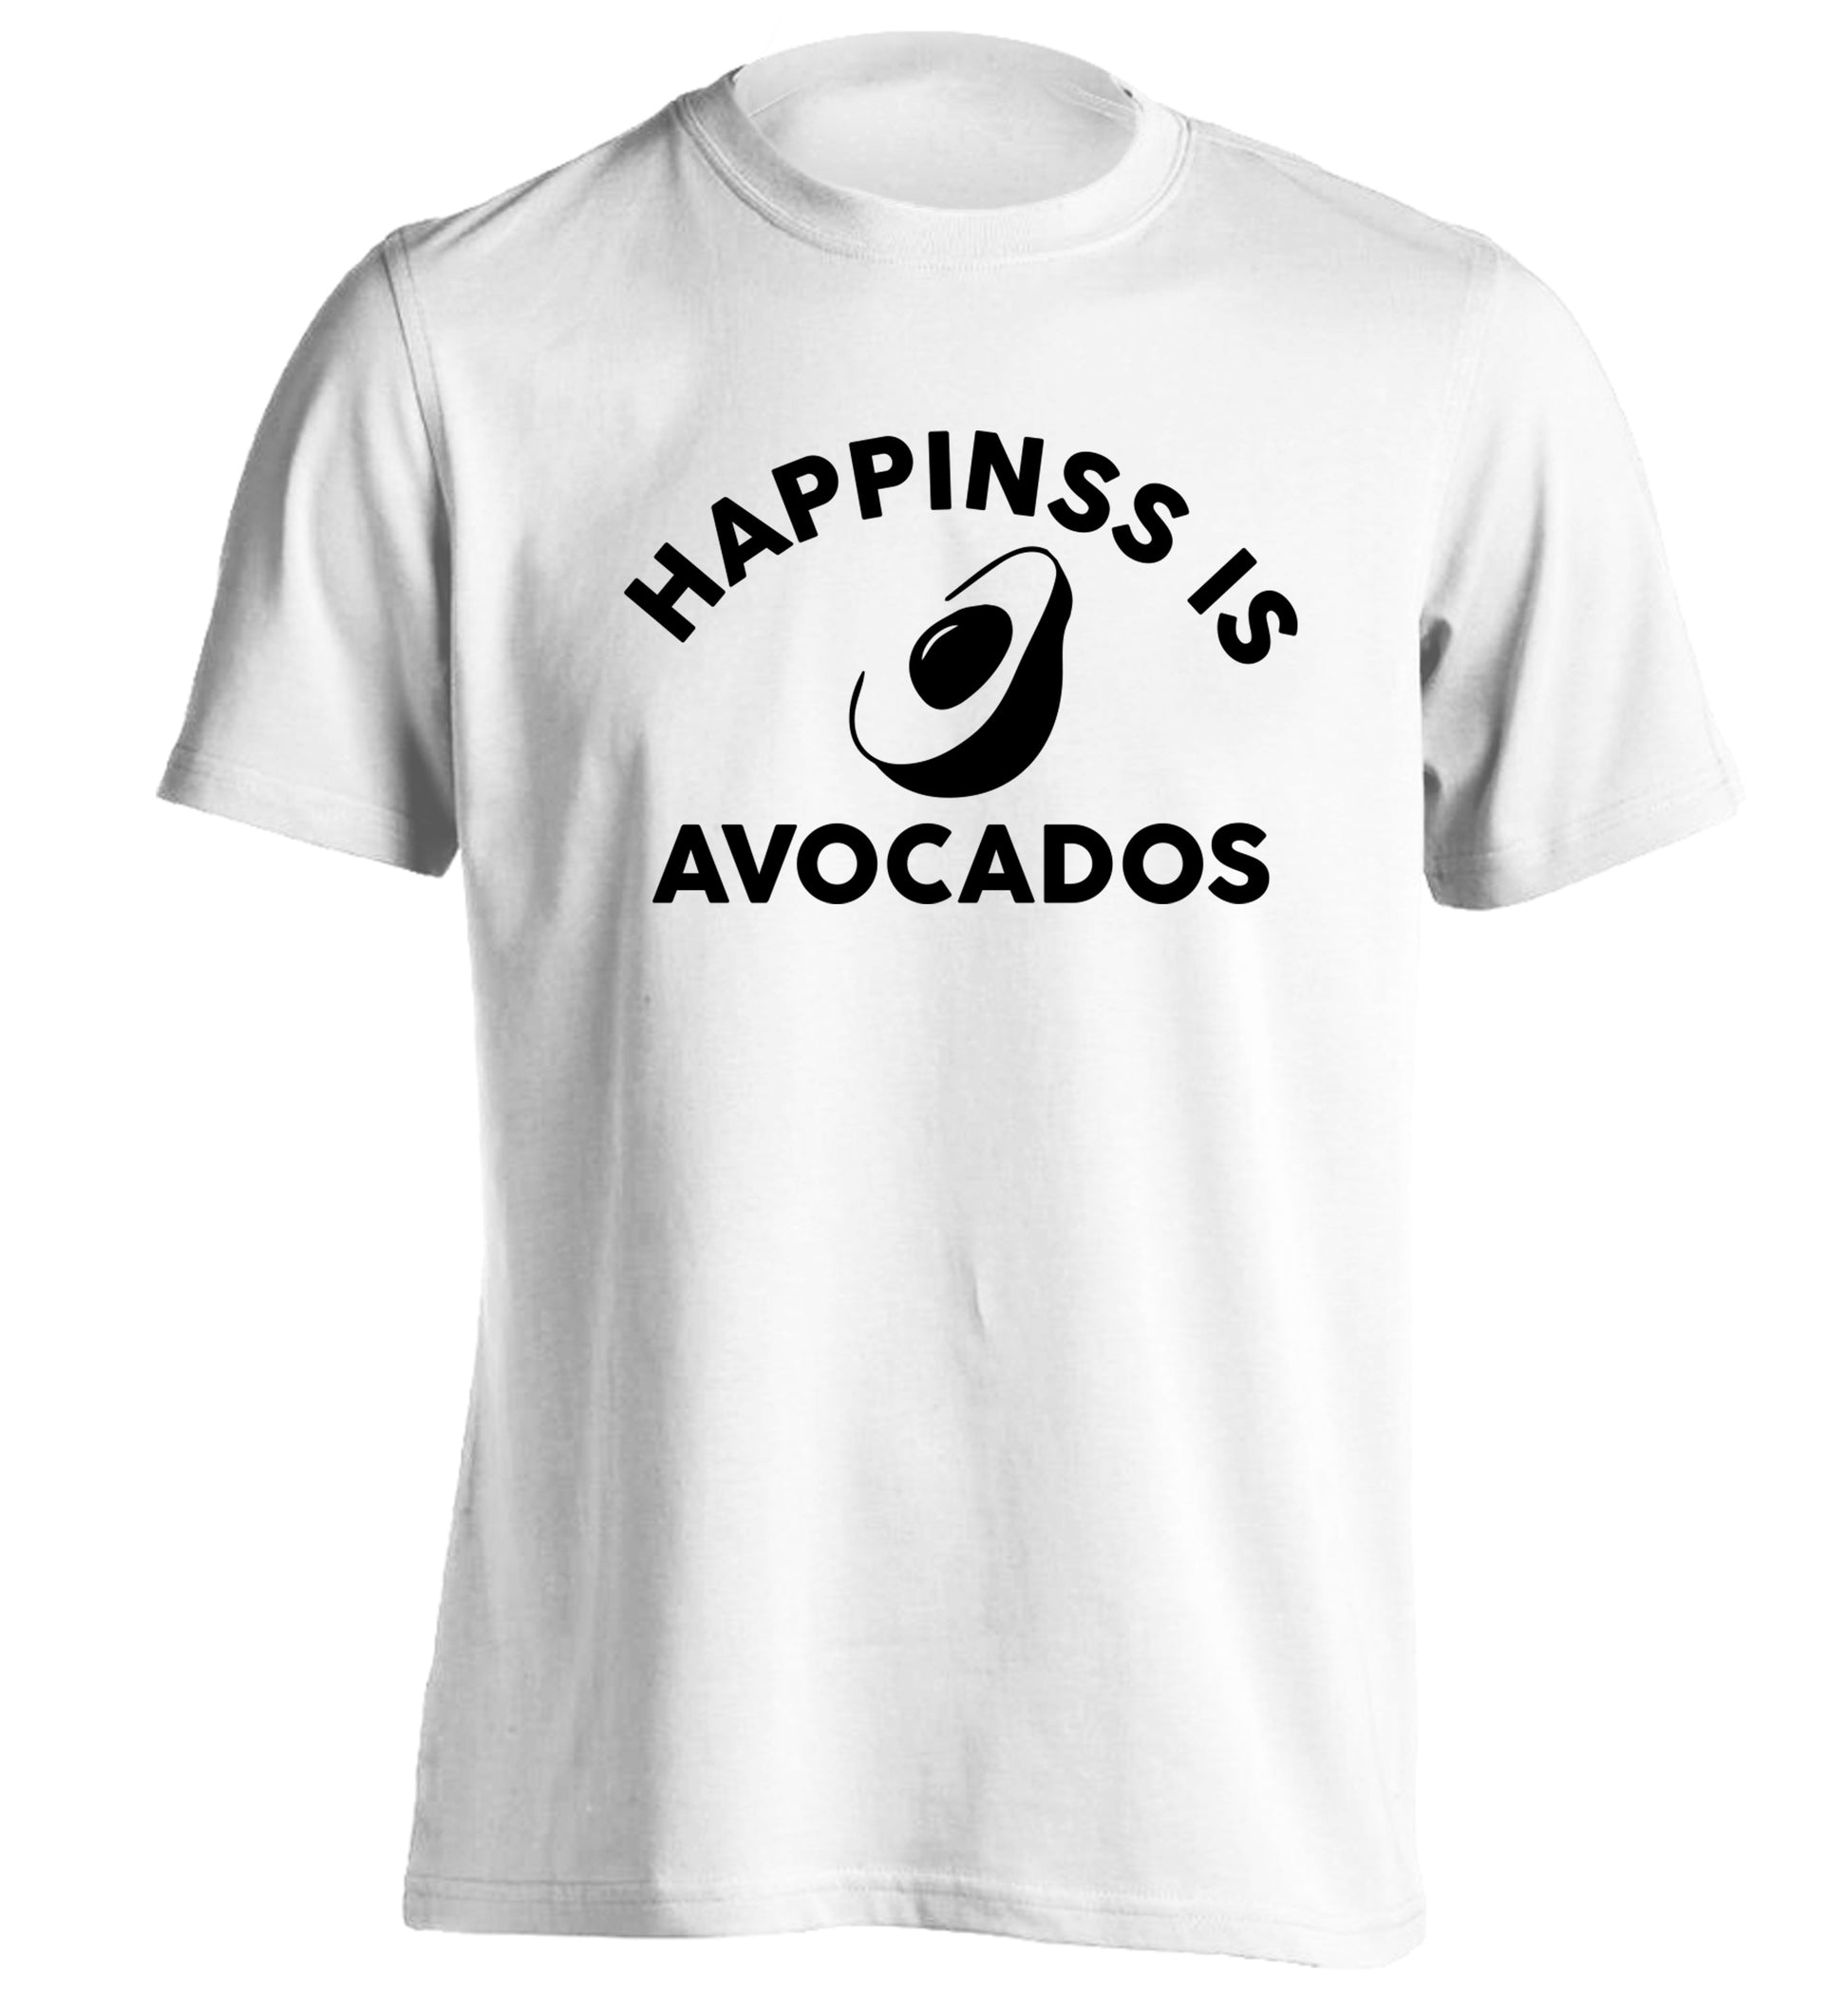 Happiness is avocados adults unisex white Tshirt 2XL